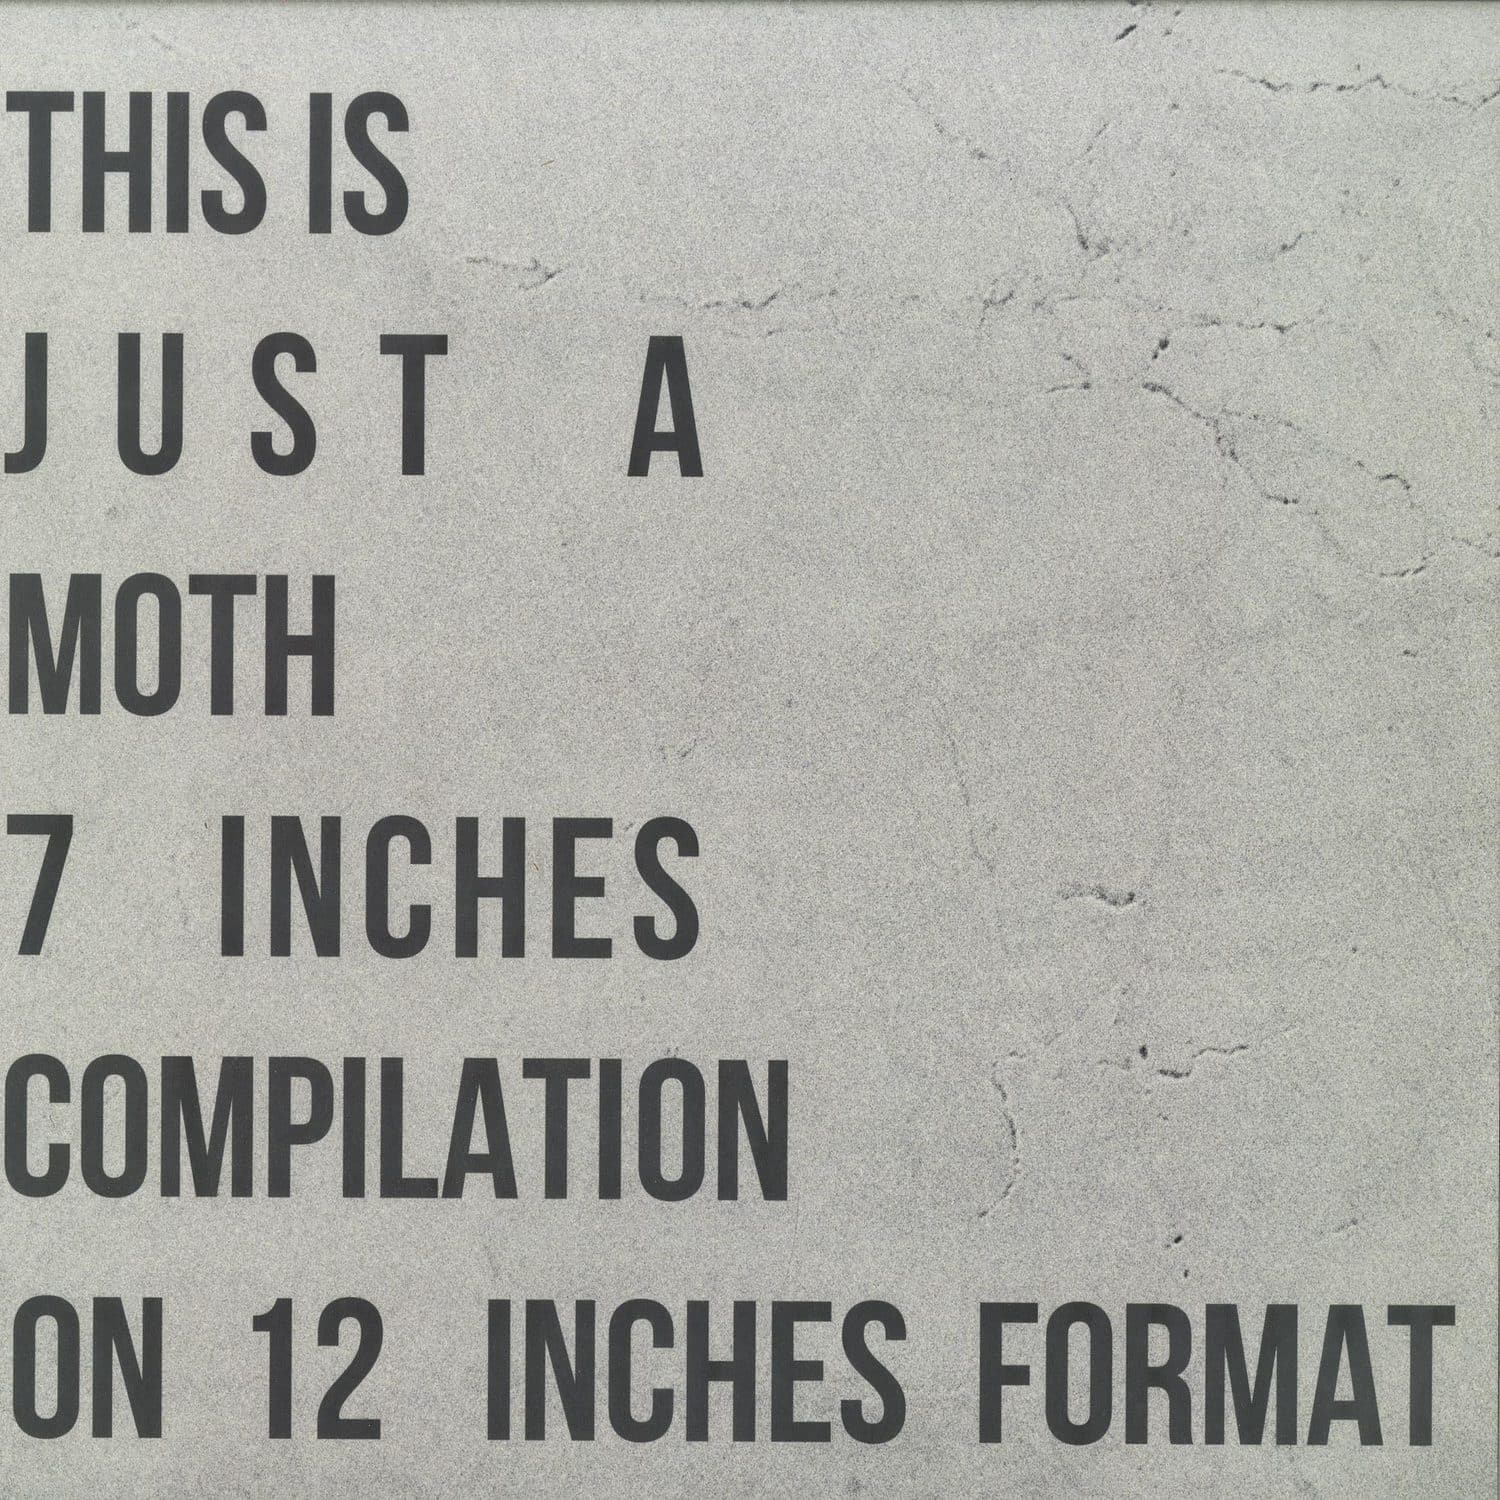 Moth - THIS IS JUST A MOTH SEVEN INCHES COMPILATION ON 12 INCHES FORMAT 